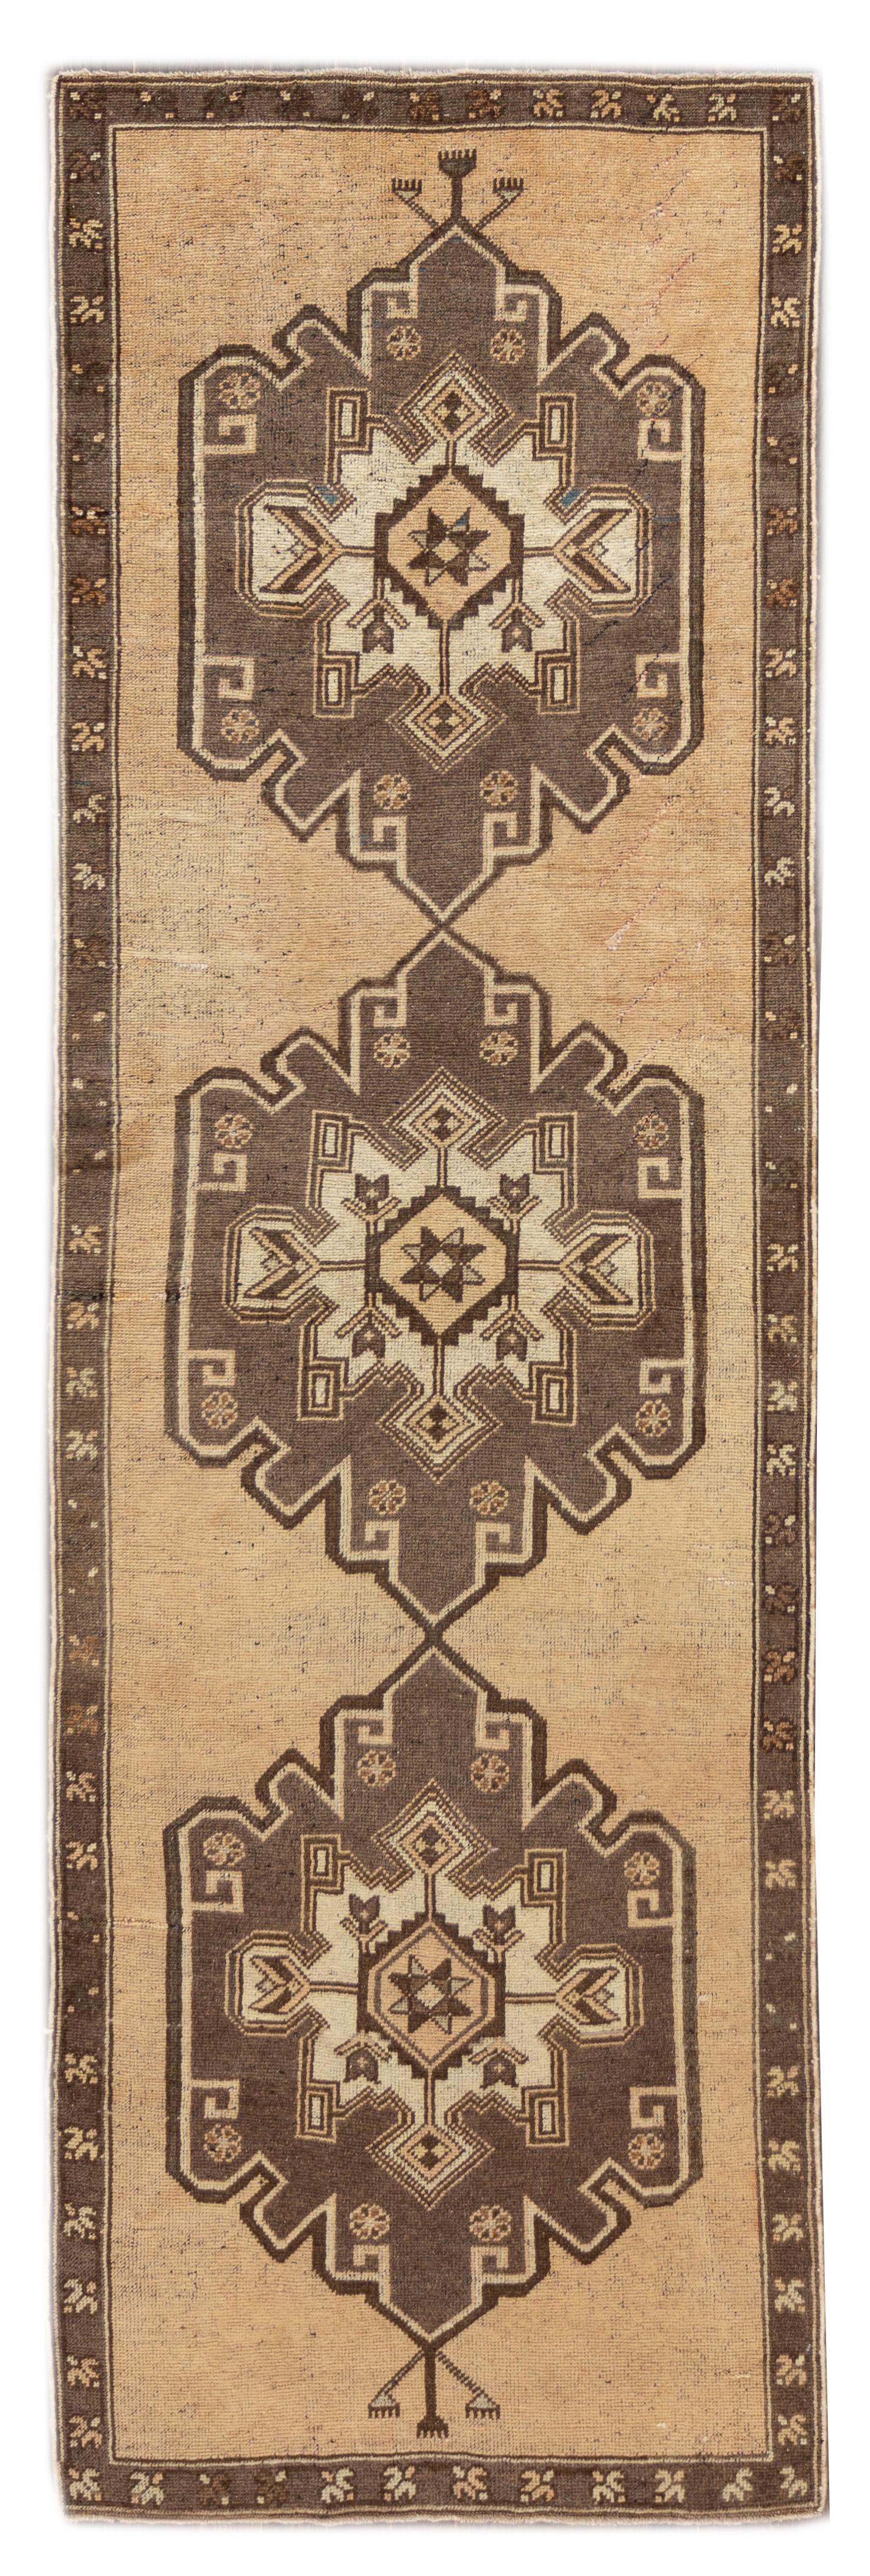 A vintage hand knotted wool Turkish runner rug with a tan field and multi-medallion design. This rug measures 3'3